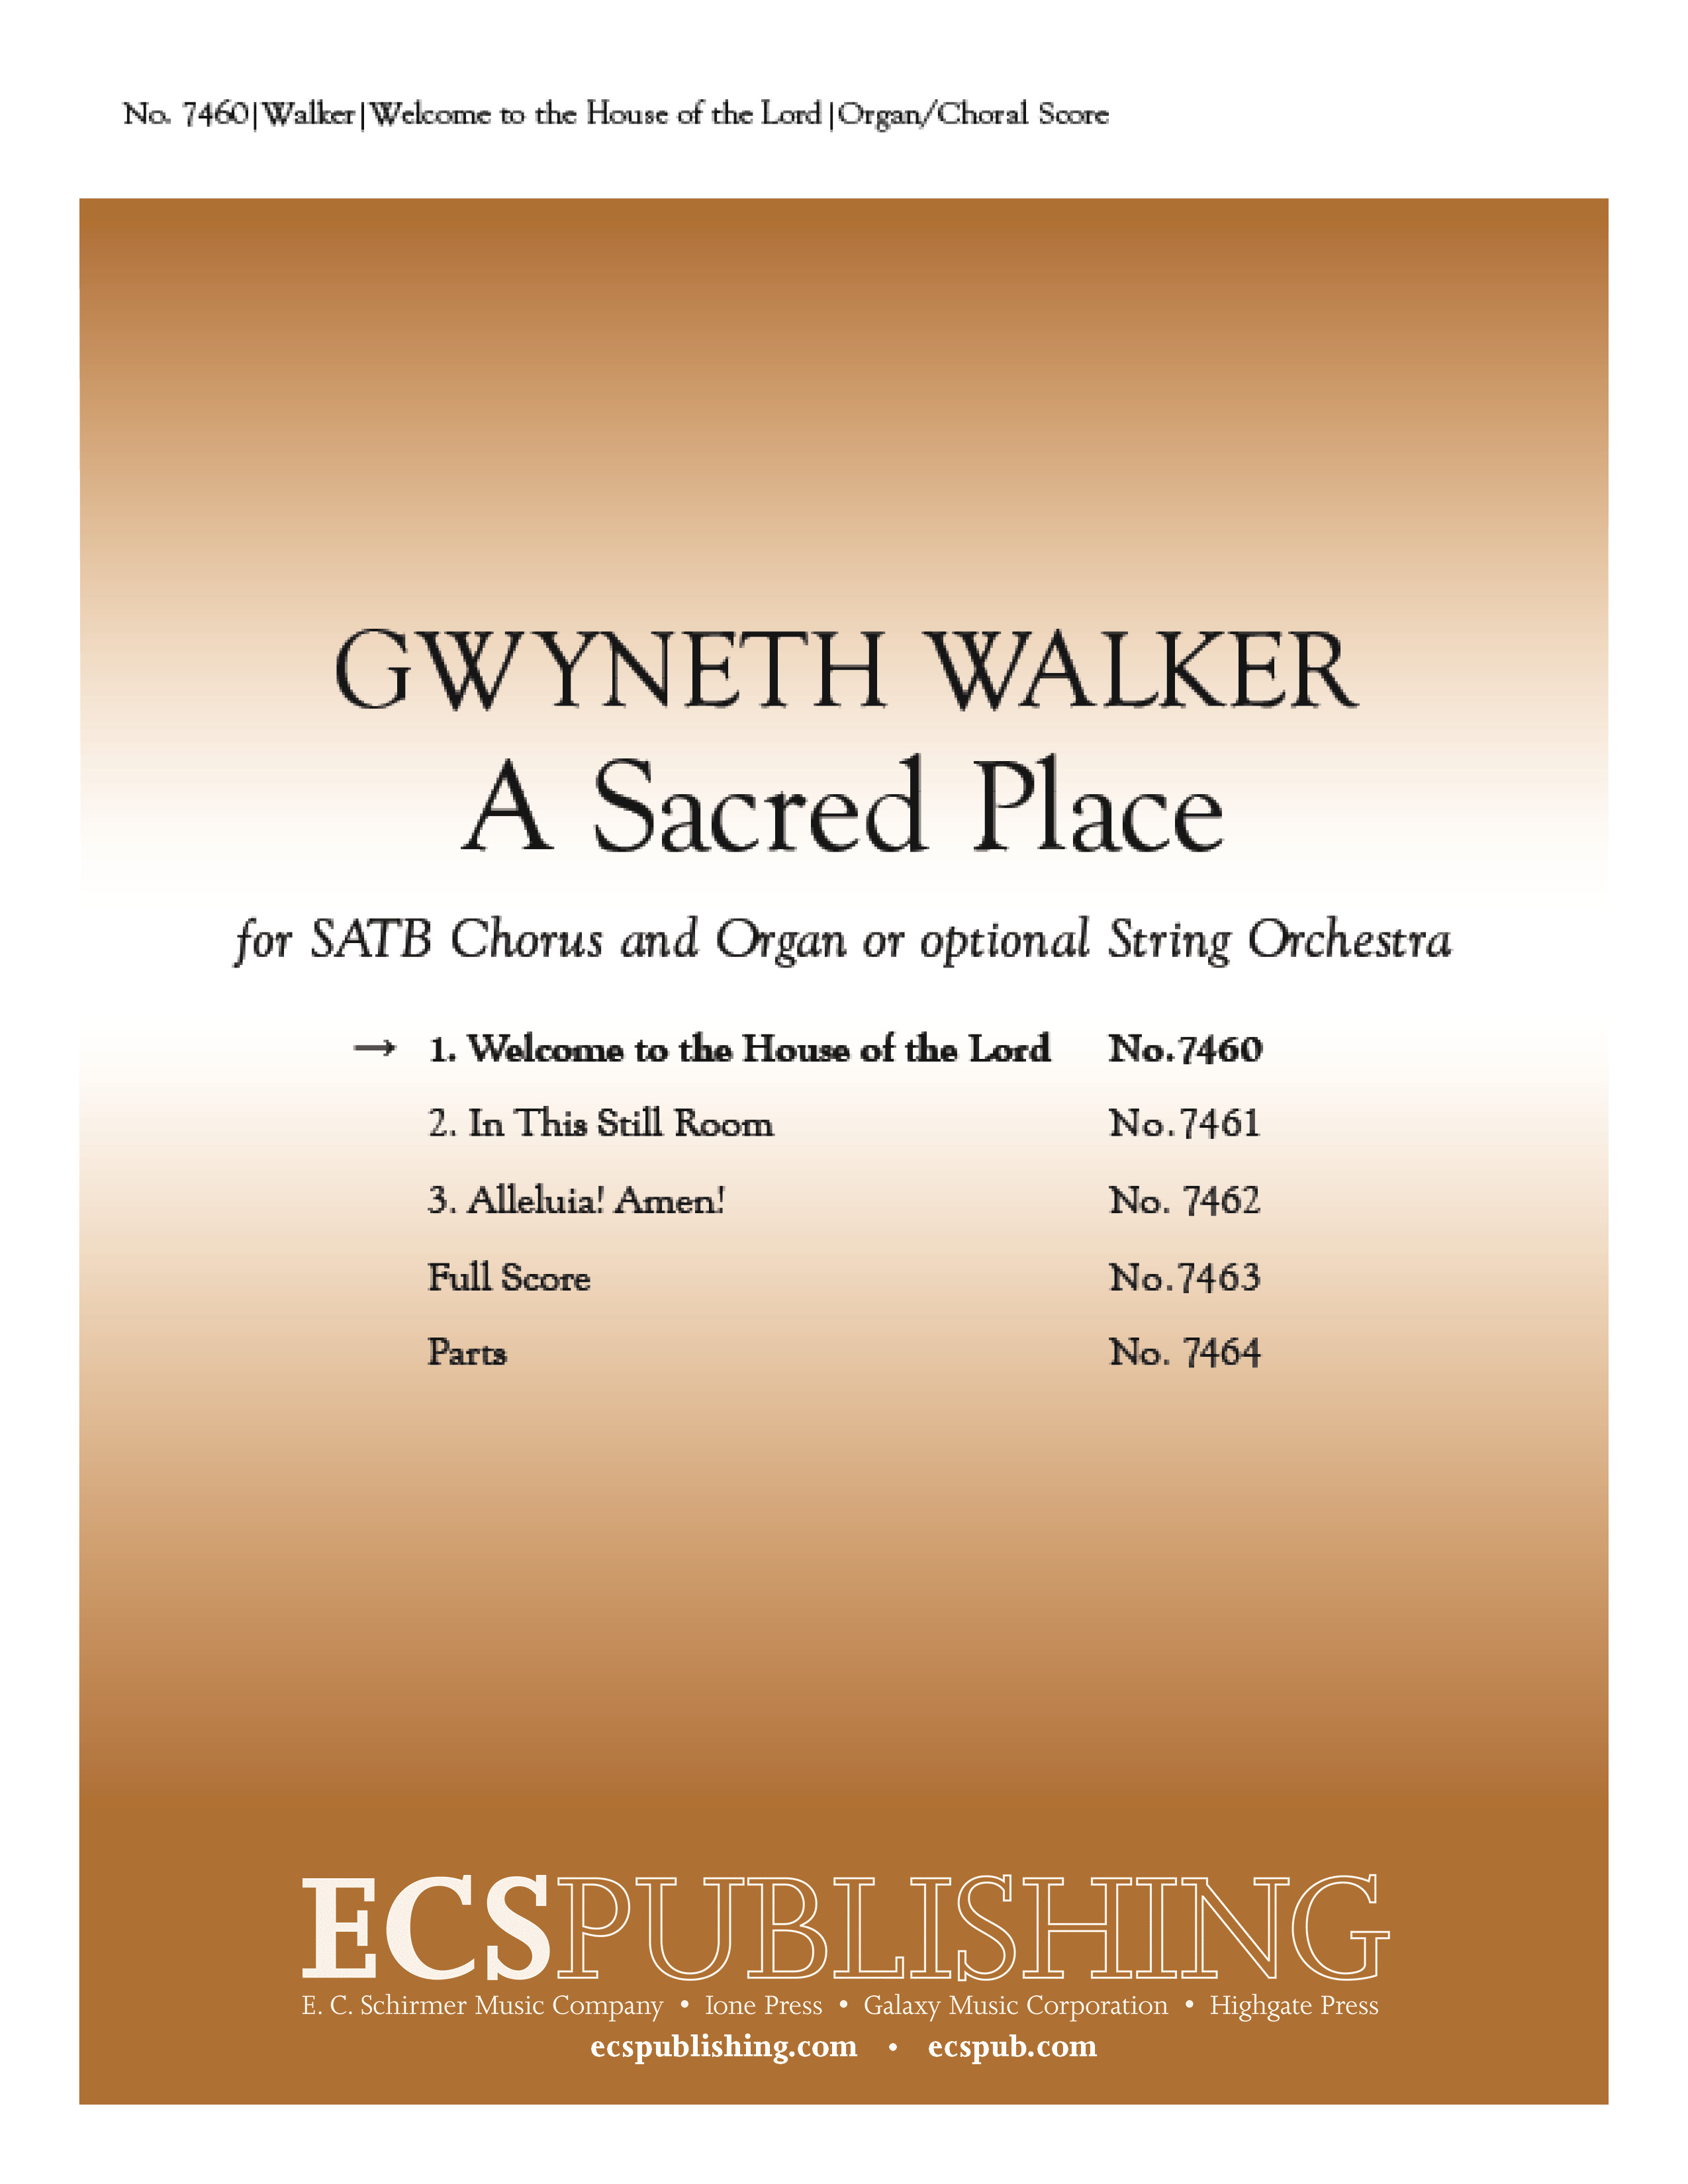 A Sacred Place: 1. Welcome to the House of the Lord : SATB : Gwyneth Walker : 7460